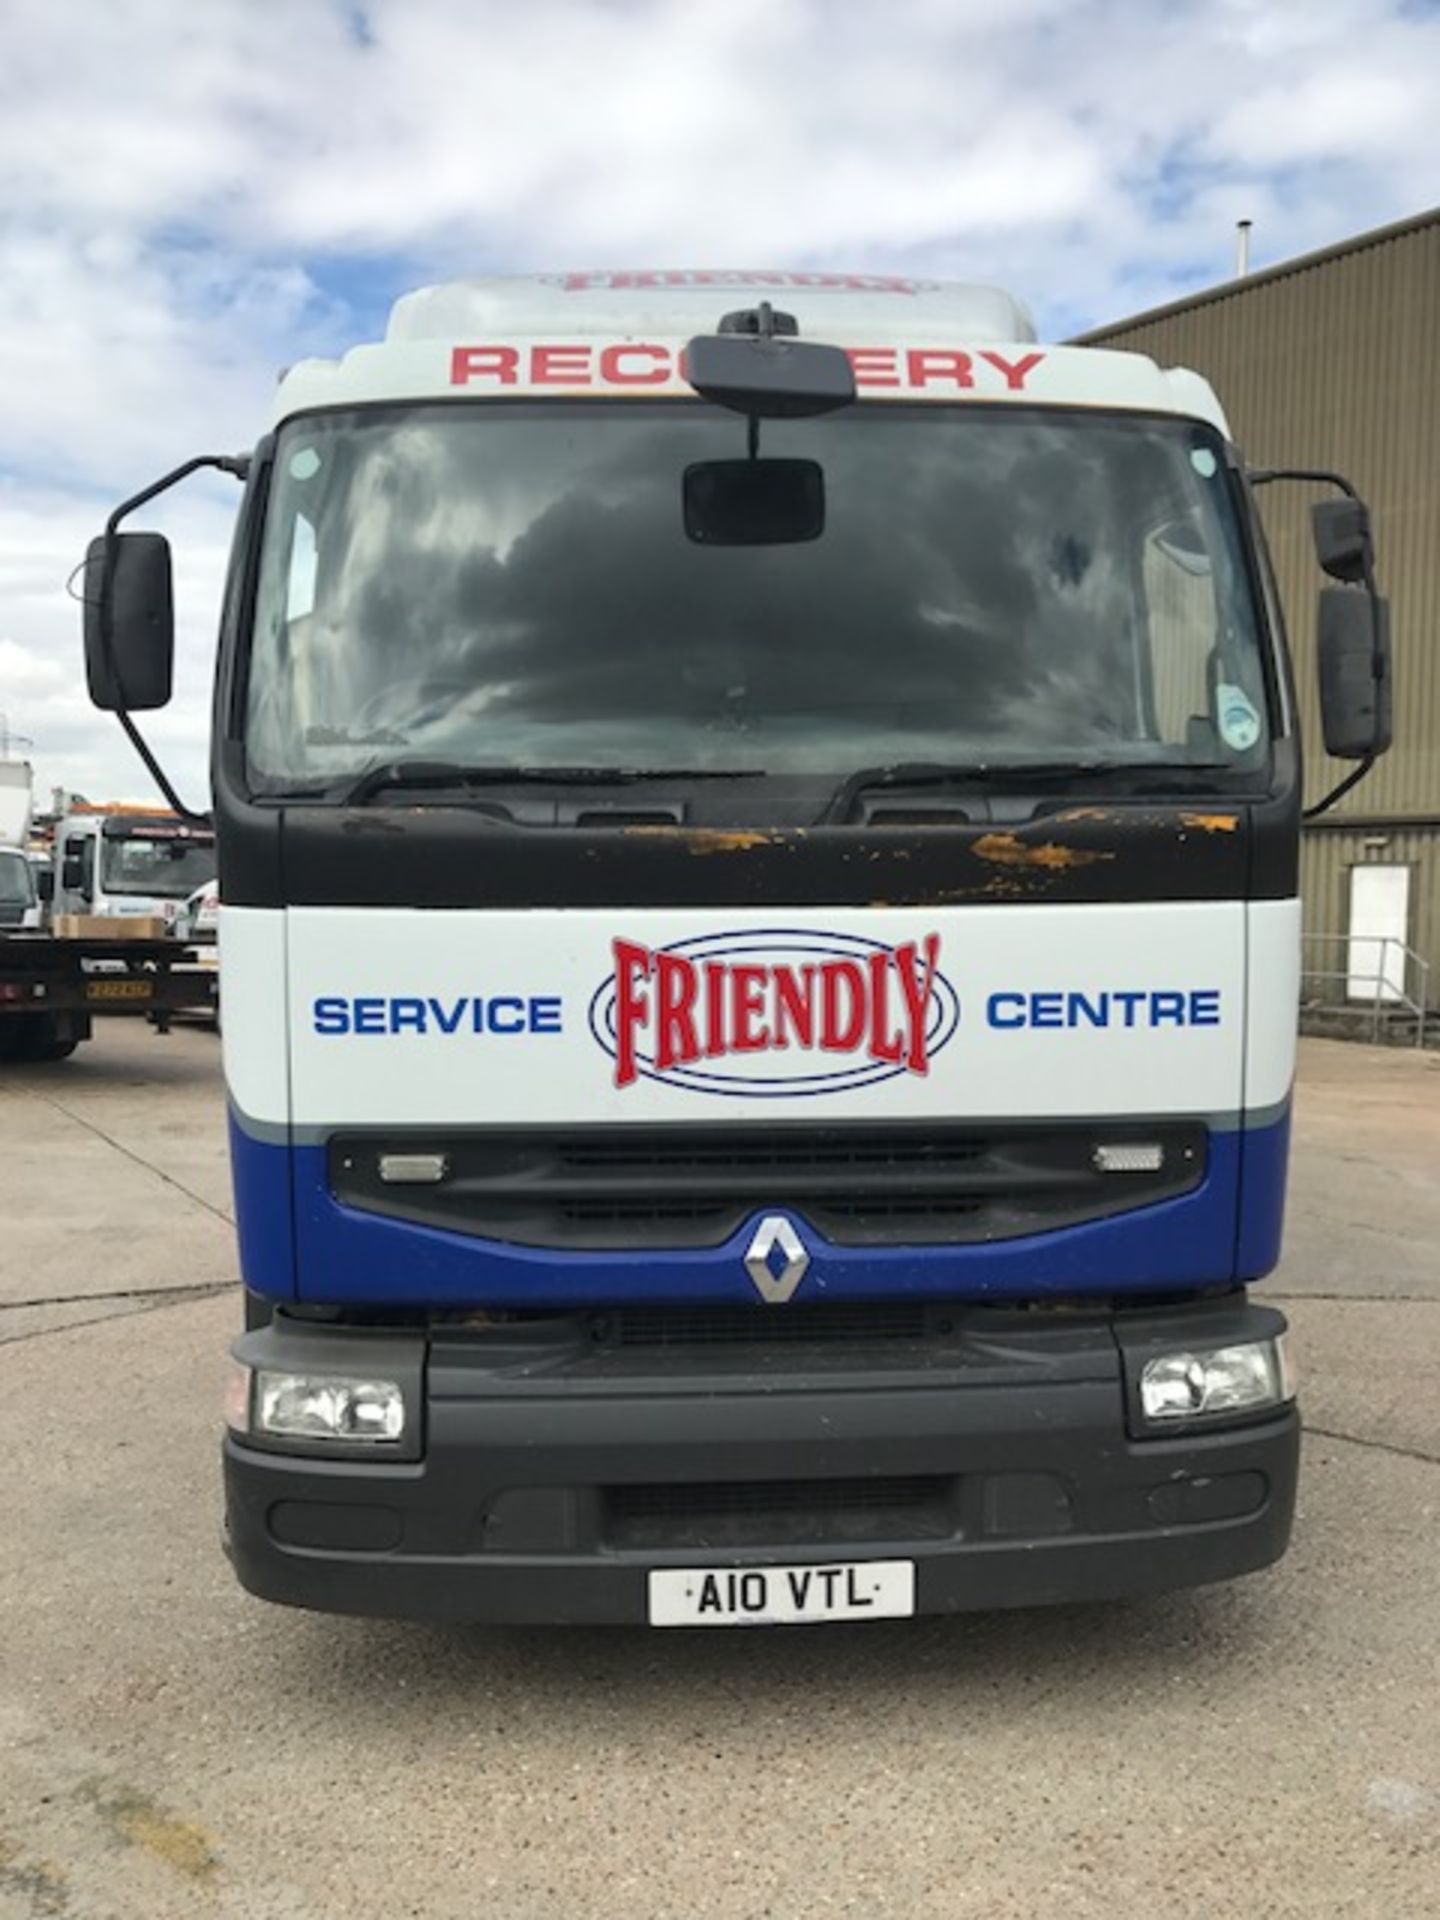 1997 Renault Premium 6/2 Tractor 26T sleeper cab breakdown recovery vehicle complete with Boniface - Image 2 of 31